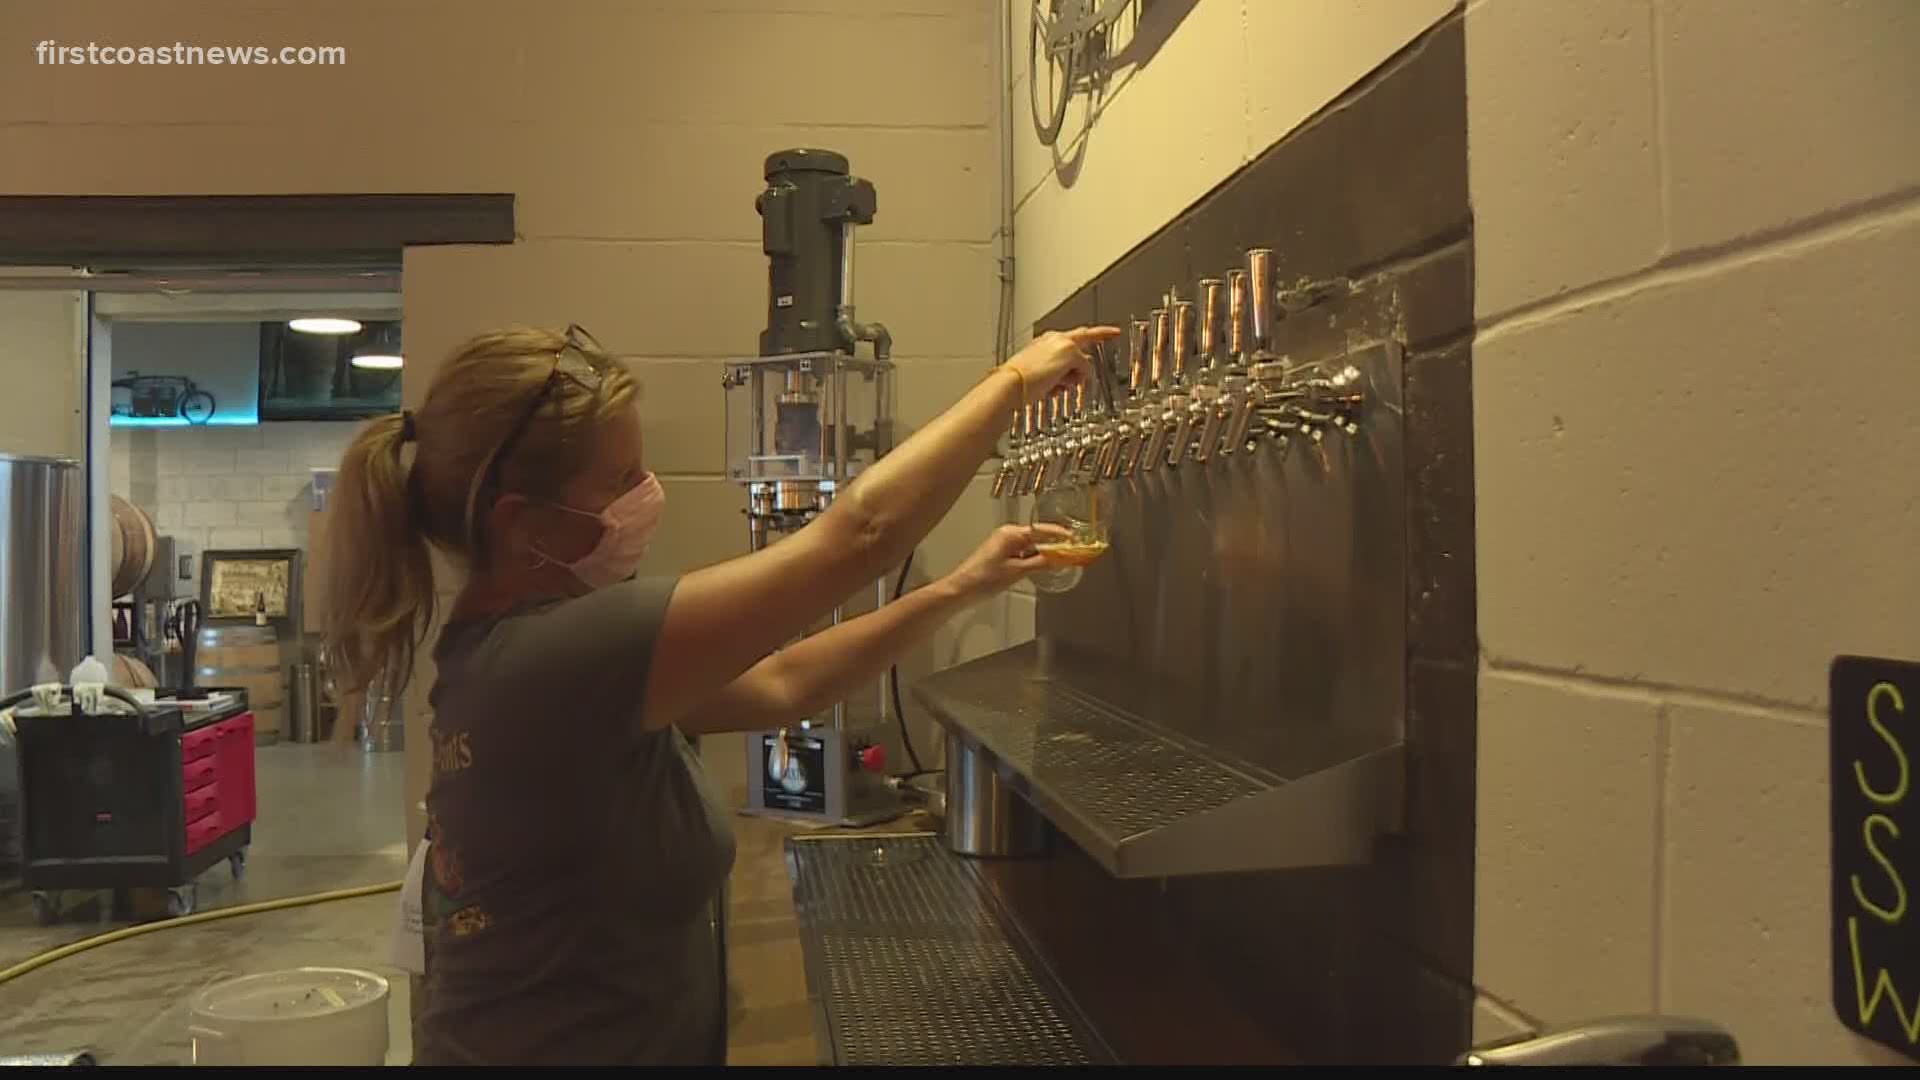 The state allows businesses classified as restaurants to serve alcohol on-premise, so many breweries are adding food to their menus.